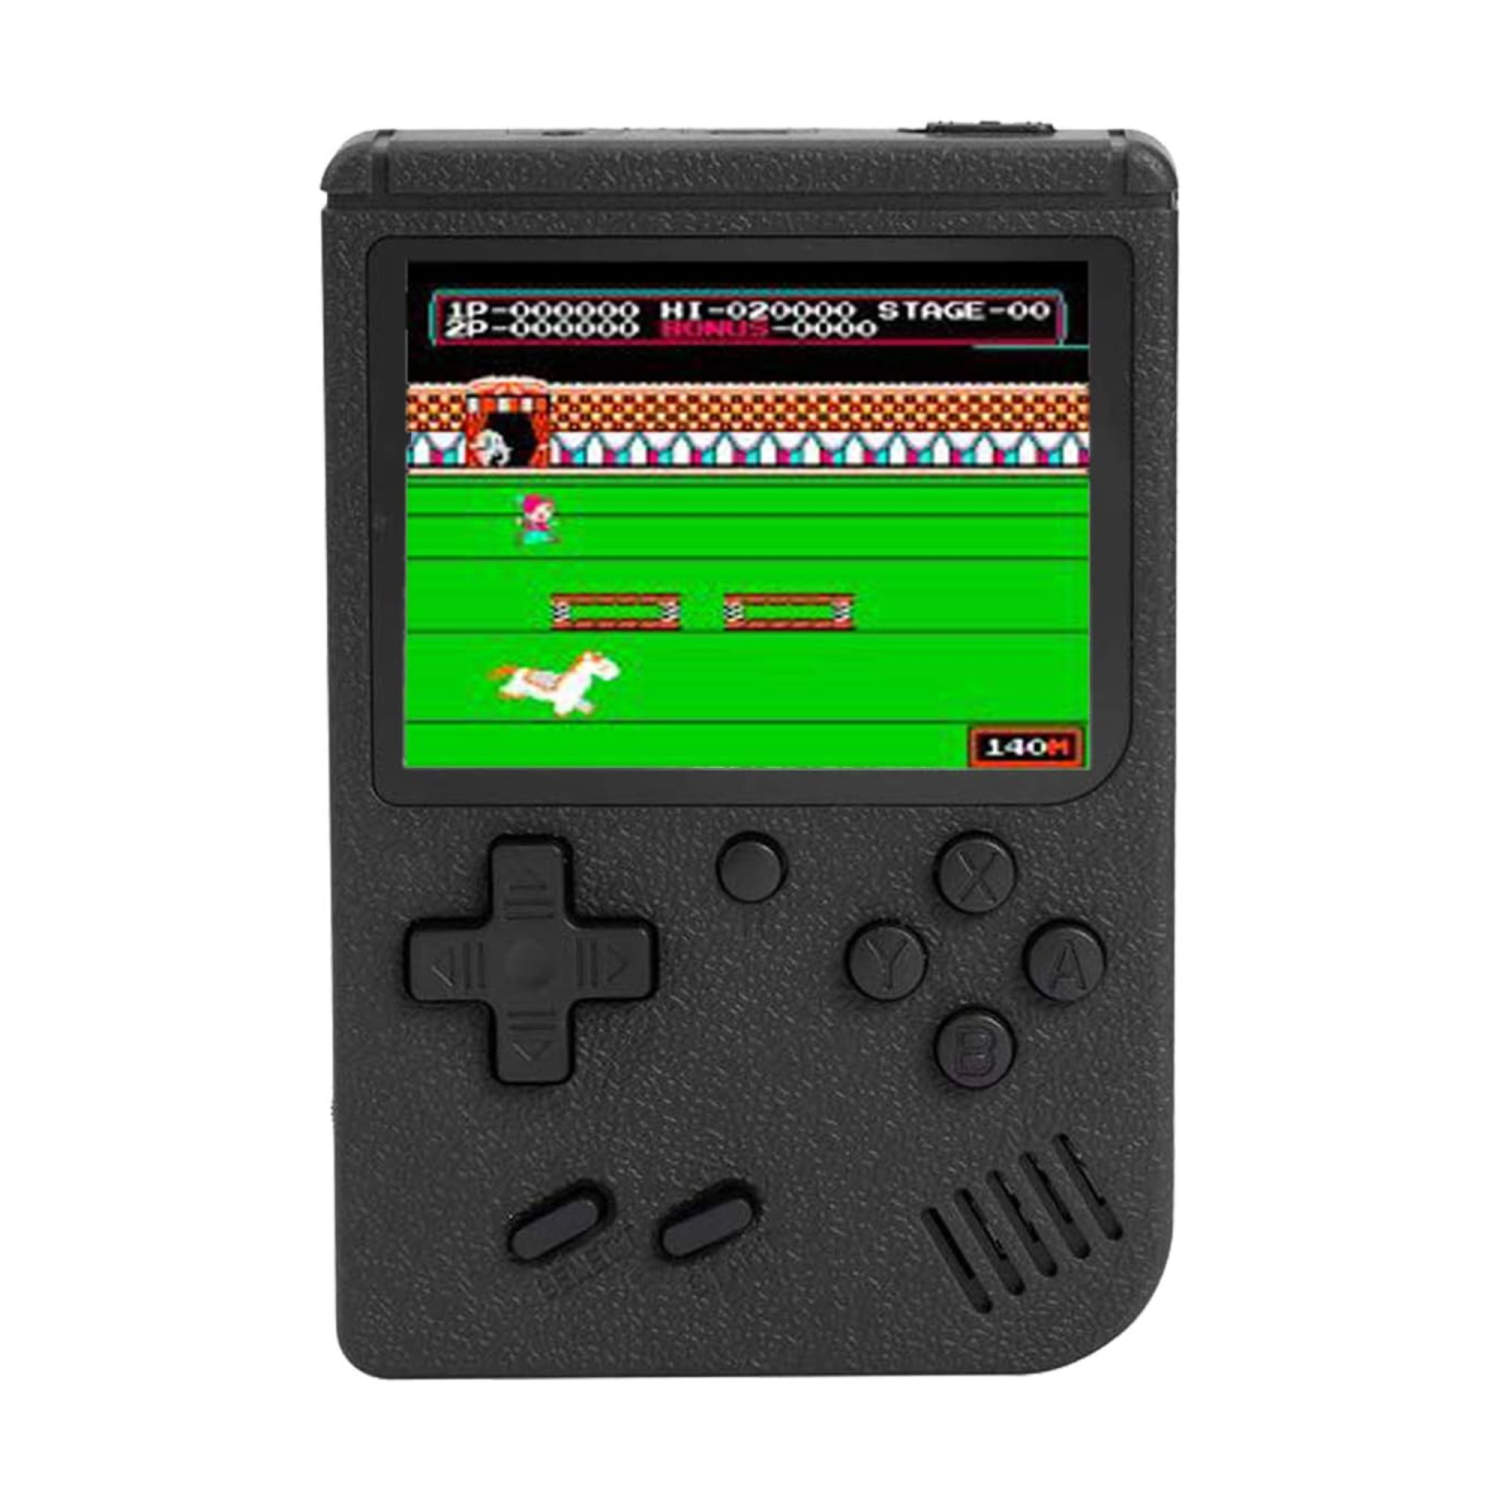 Retro Handheld Game Console, Christmas Birthday Presents for Kids, Adults with 400 Classical FC Games, 3.0-Inch Screen (Games Consoles Black)